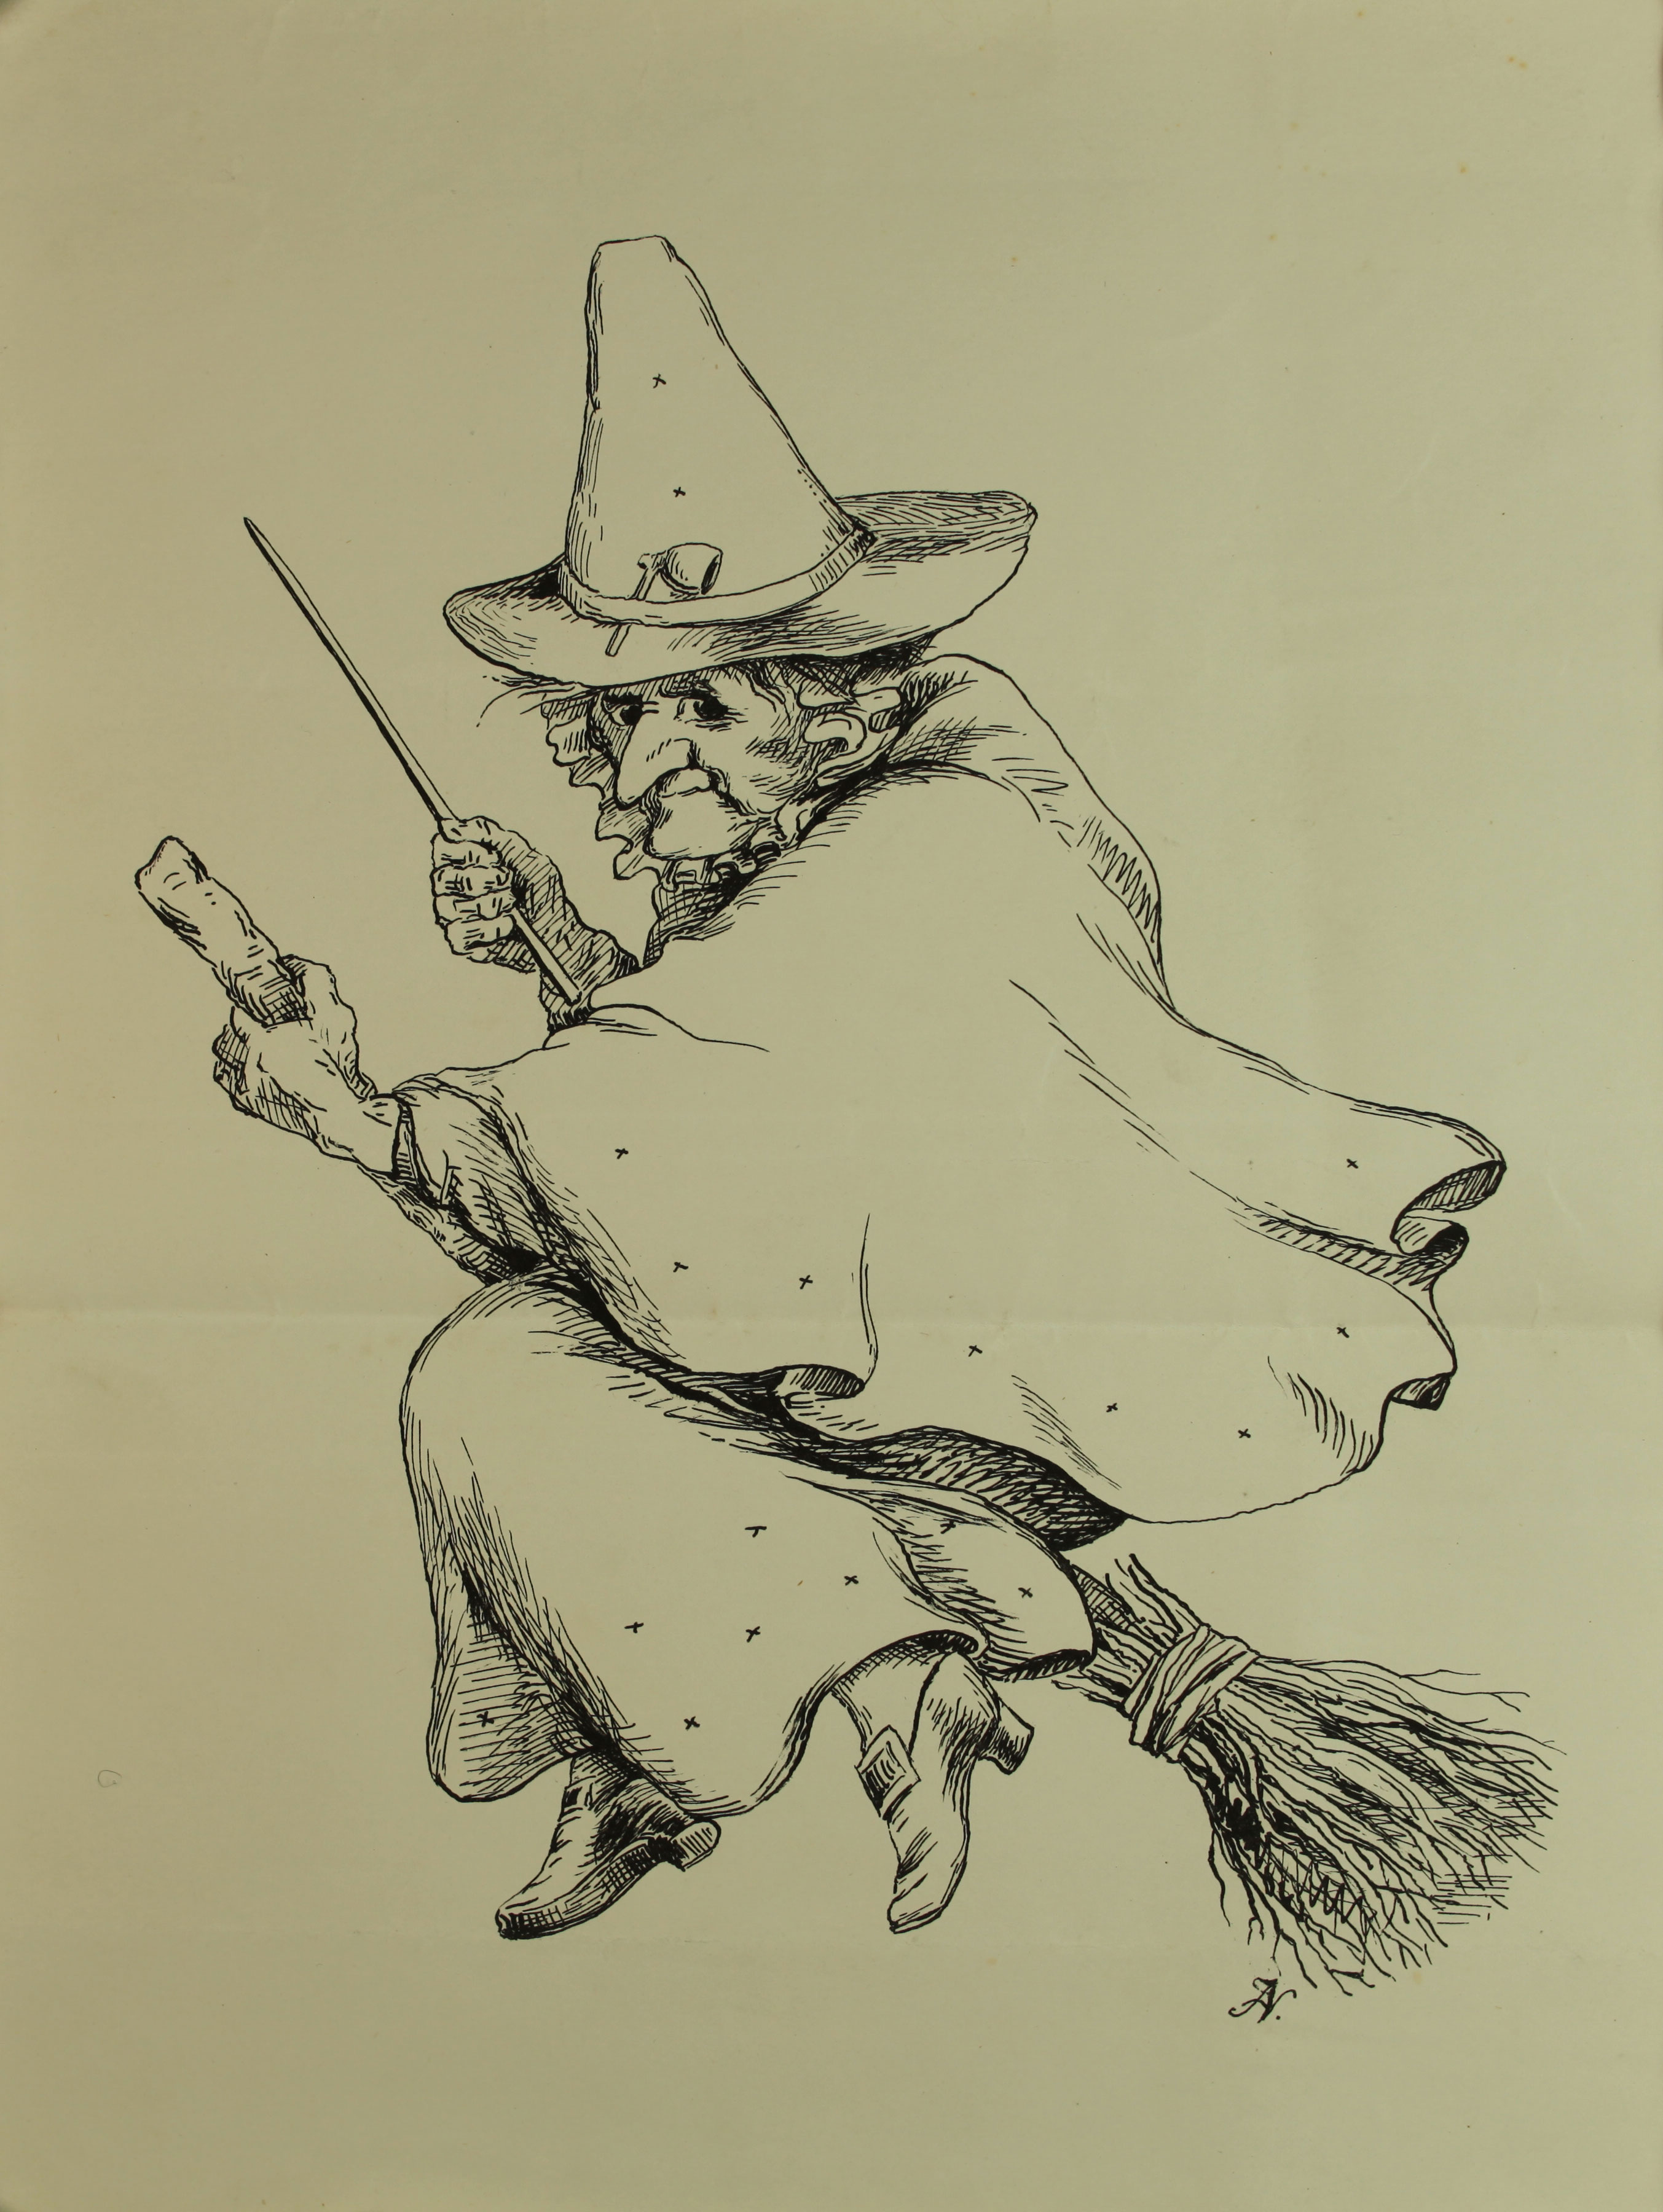 Illustration of a old woman dressed as a witch in a cape, skirt and pointed hat. She sits on a broomstick and holds up a wand.